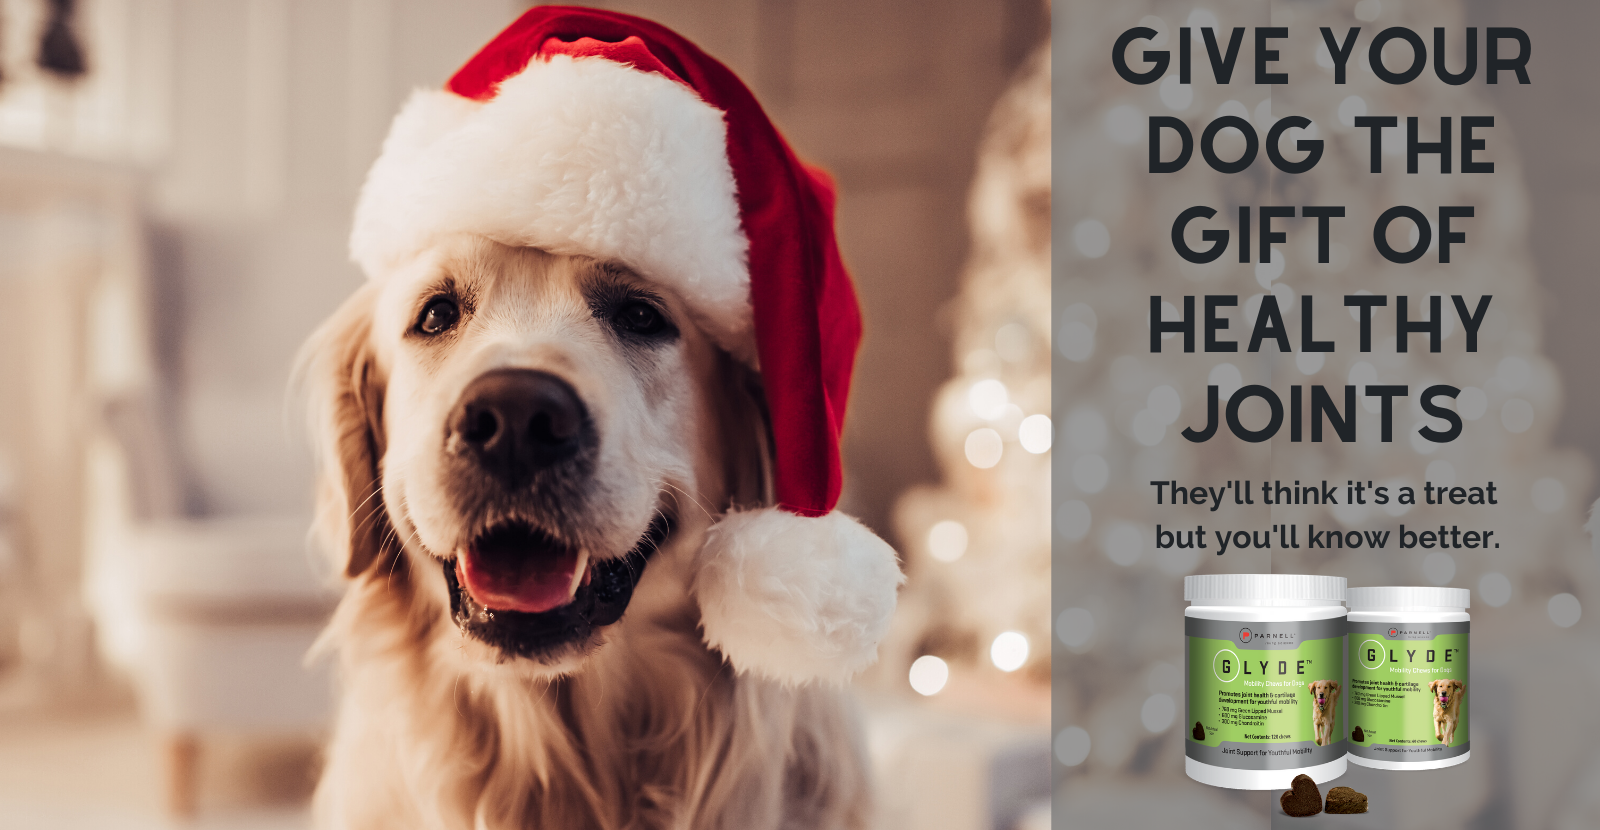 Give the gift of healthy joints